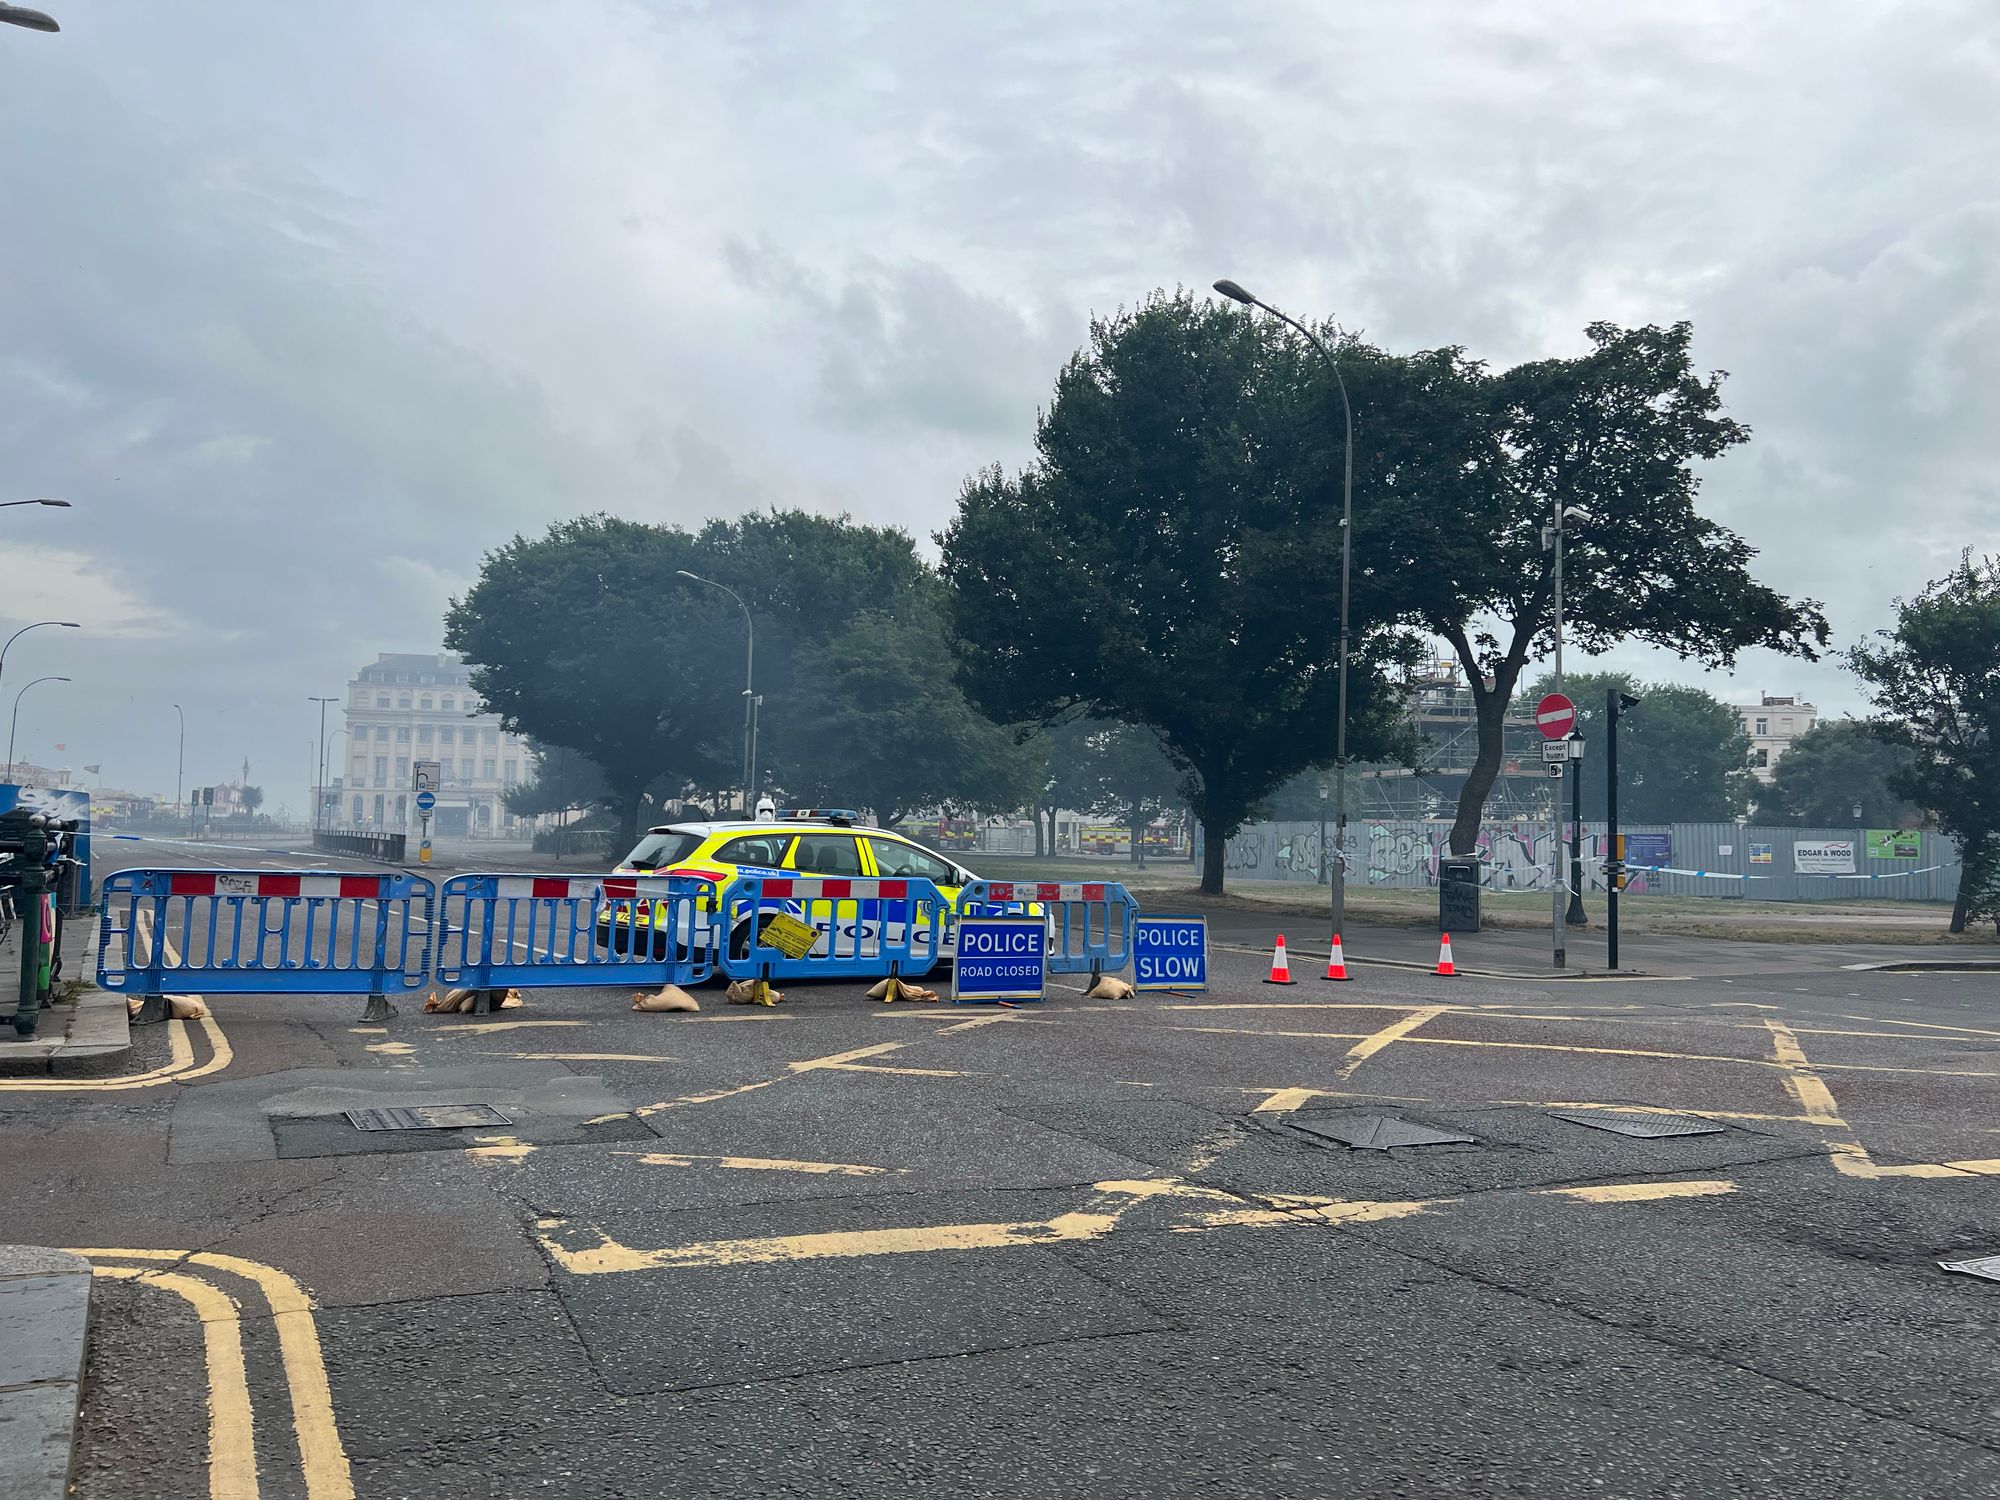 Photograph of a smoke-filled Old Steine with the road closed by police